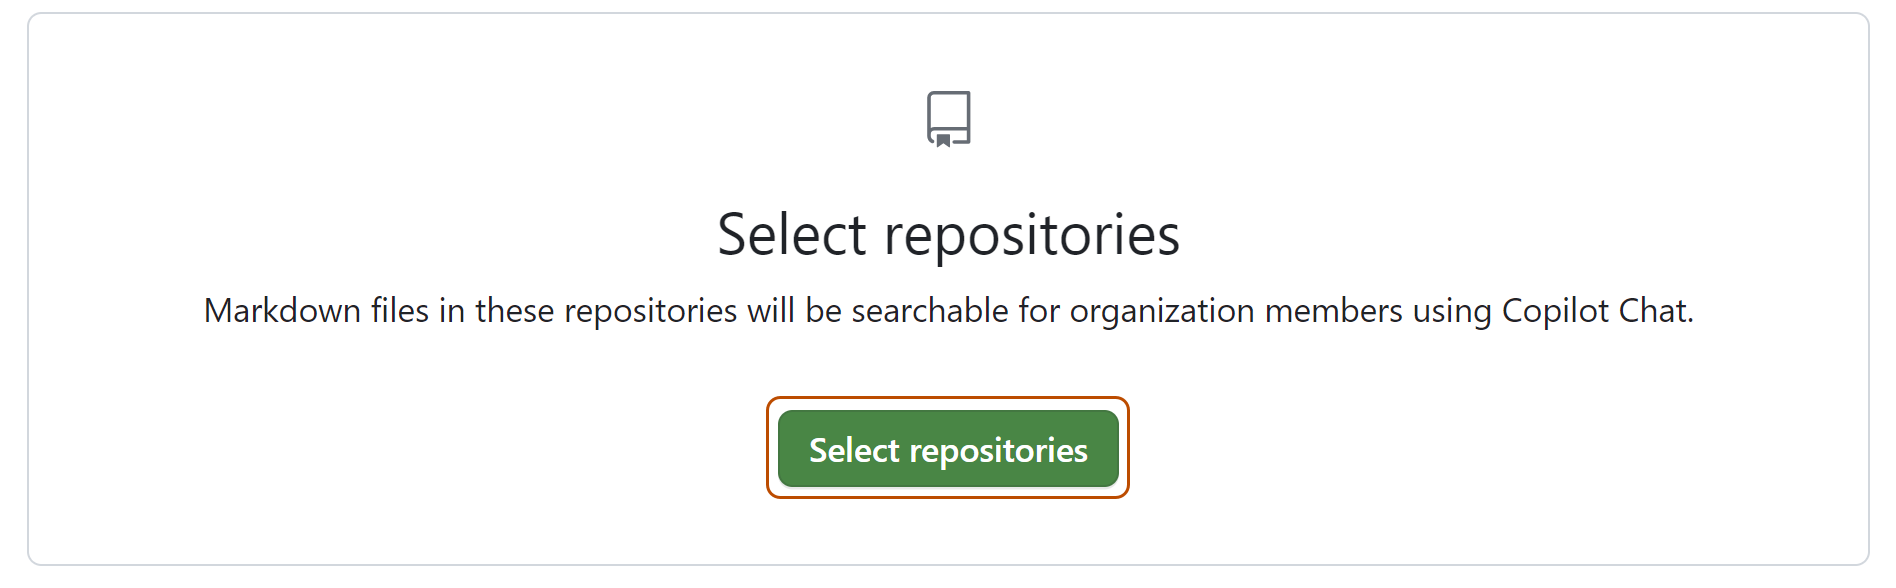 Screenshot of the "Select repositories" page. The "Select repositories" page is highlighted with a dark orange outline.